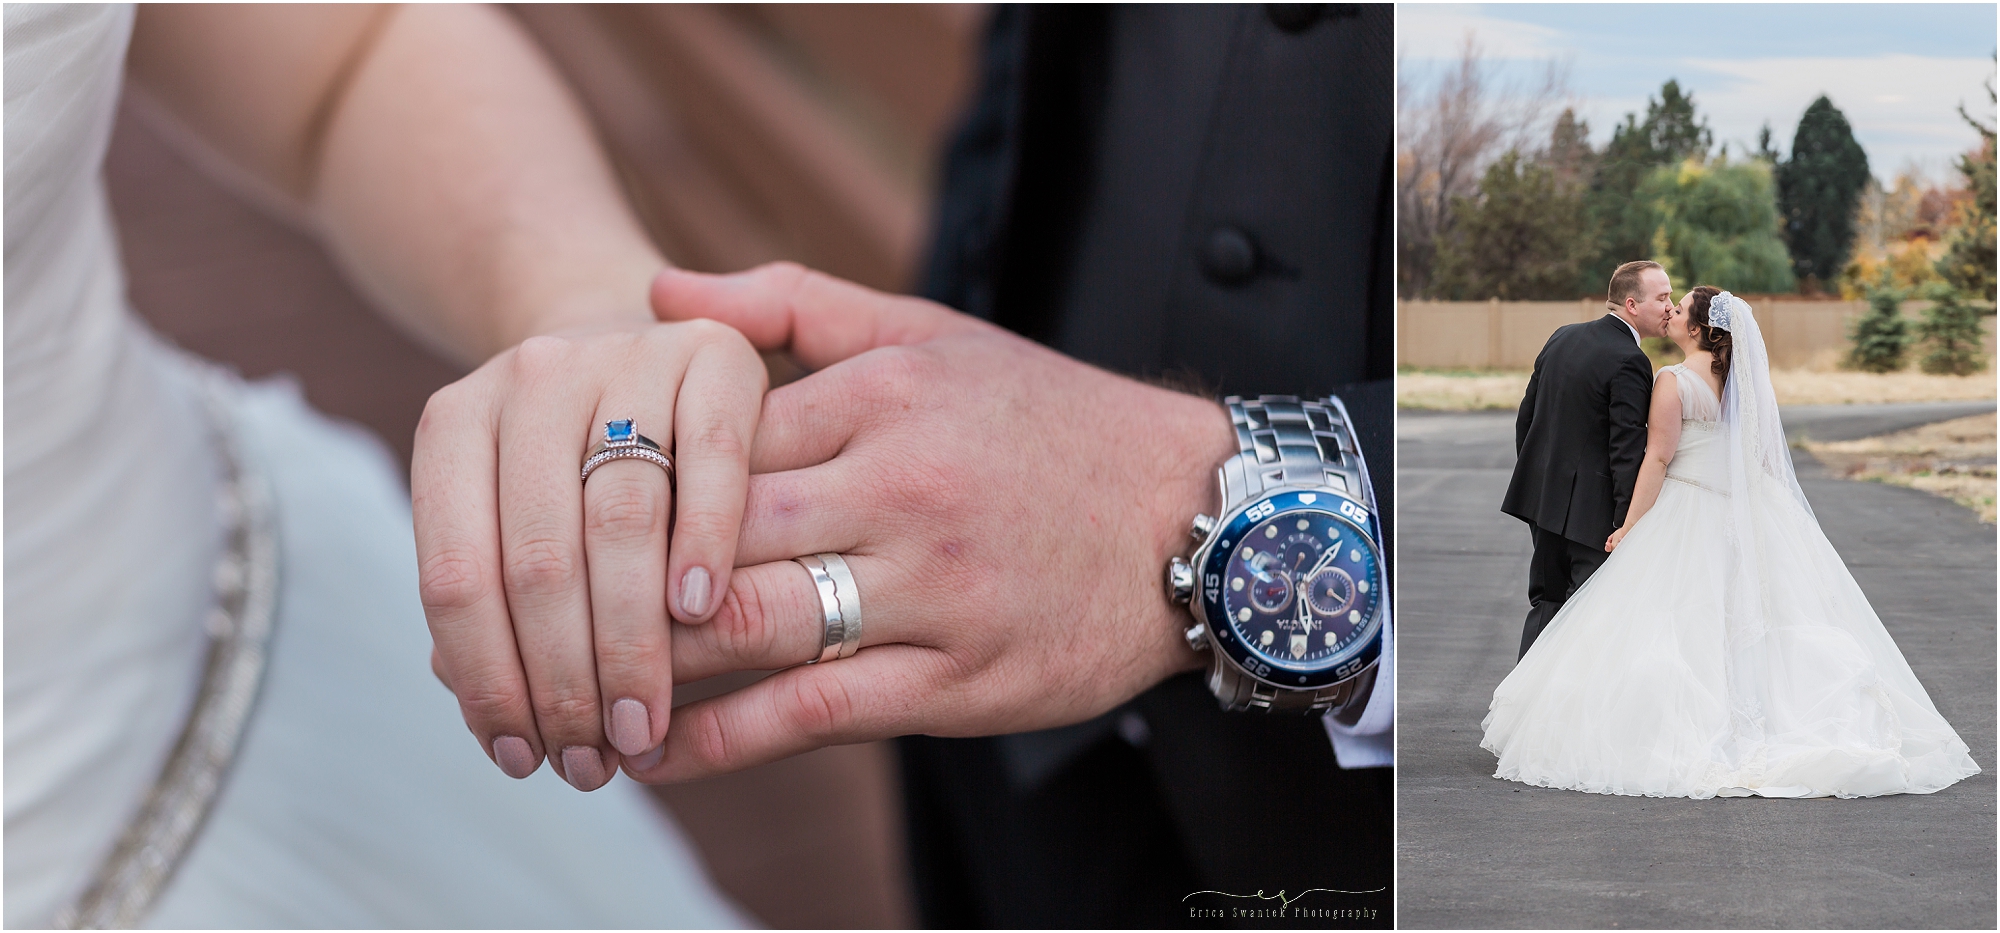 Chanel & John's rings were so unique! I love that John used a photo of the Oregon Cascades in Bend for his ring design. 